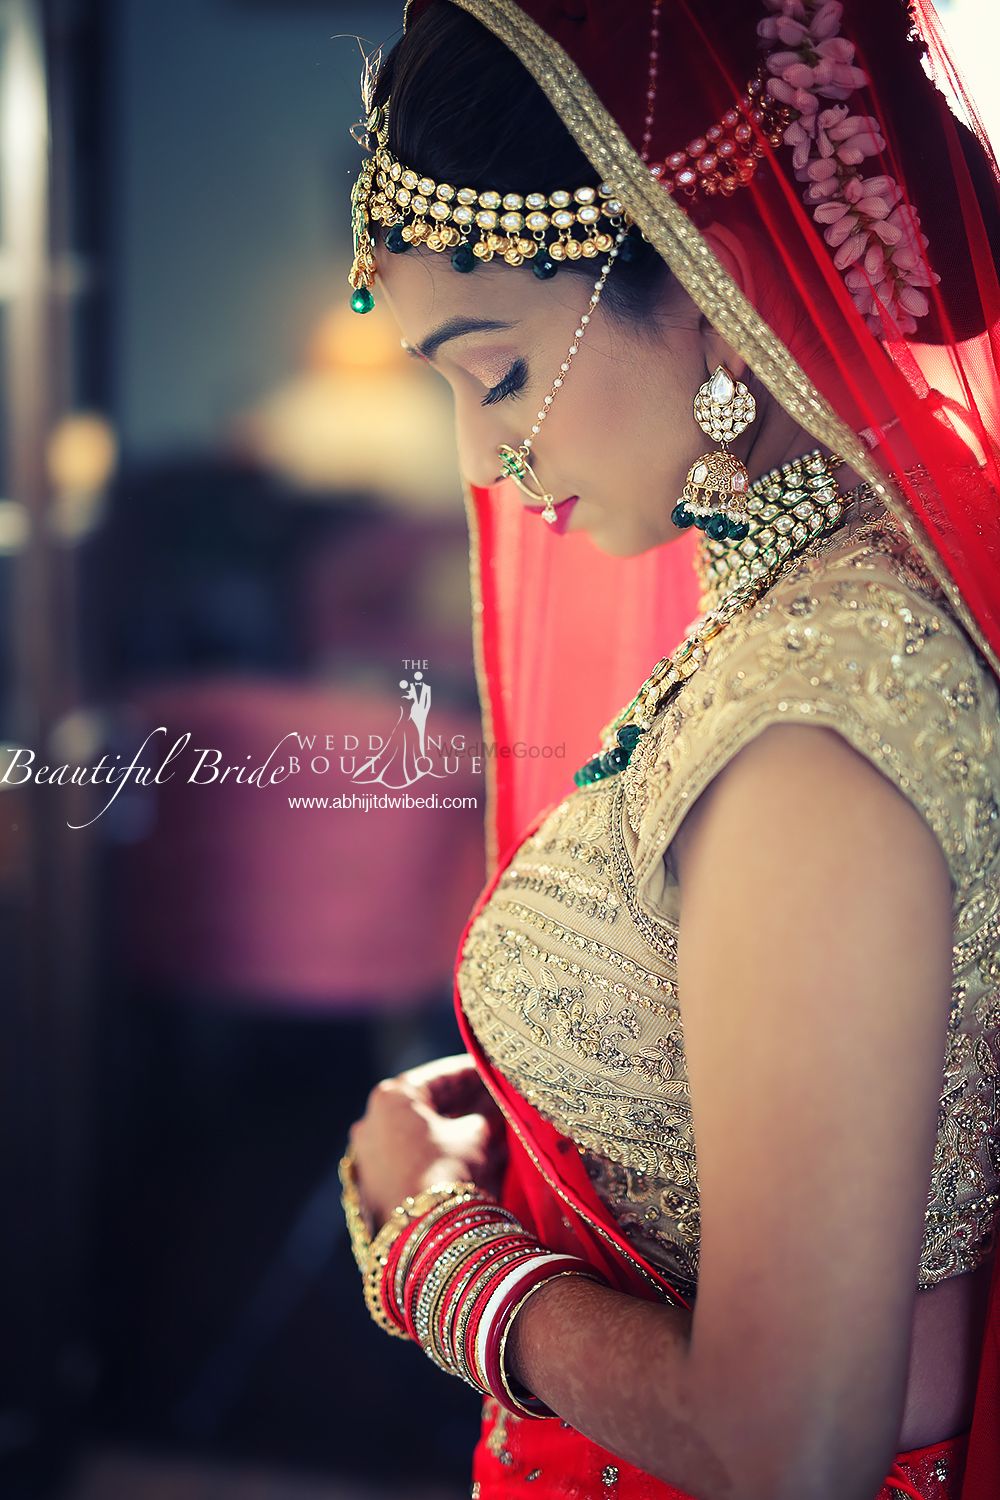 Photo From Beautiful Bride - By Abhijit Dwibedi Photography